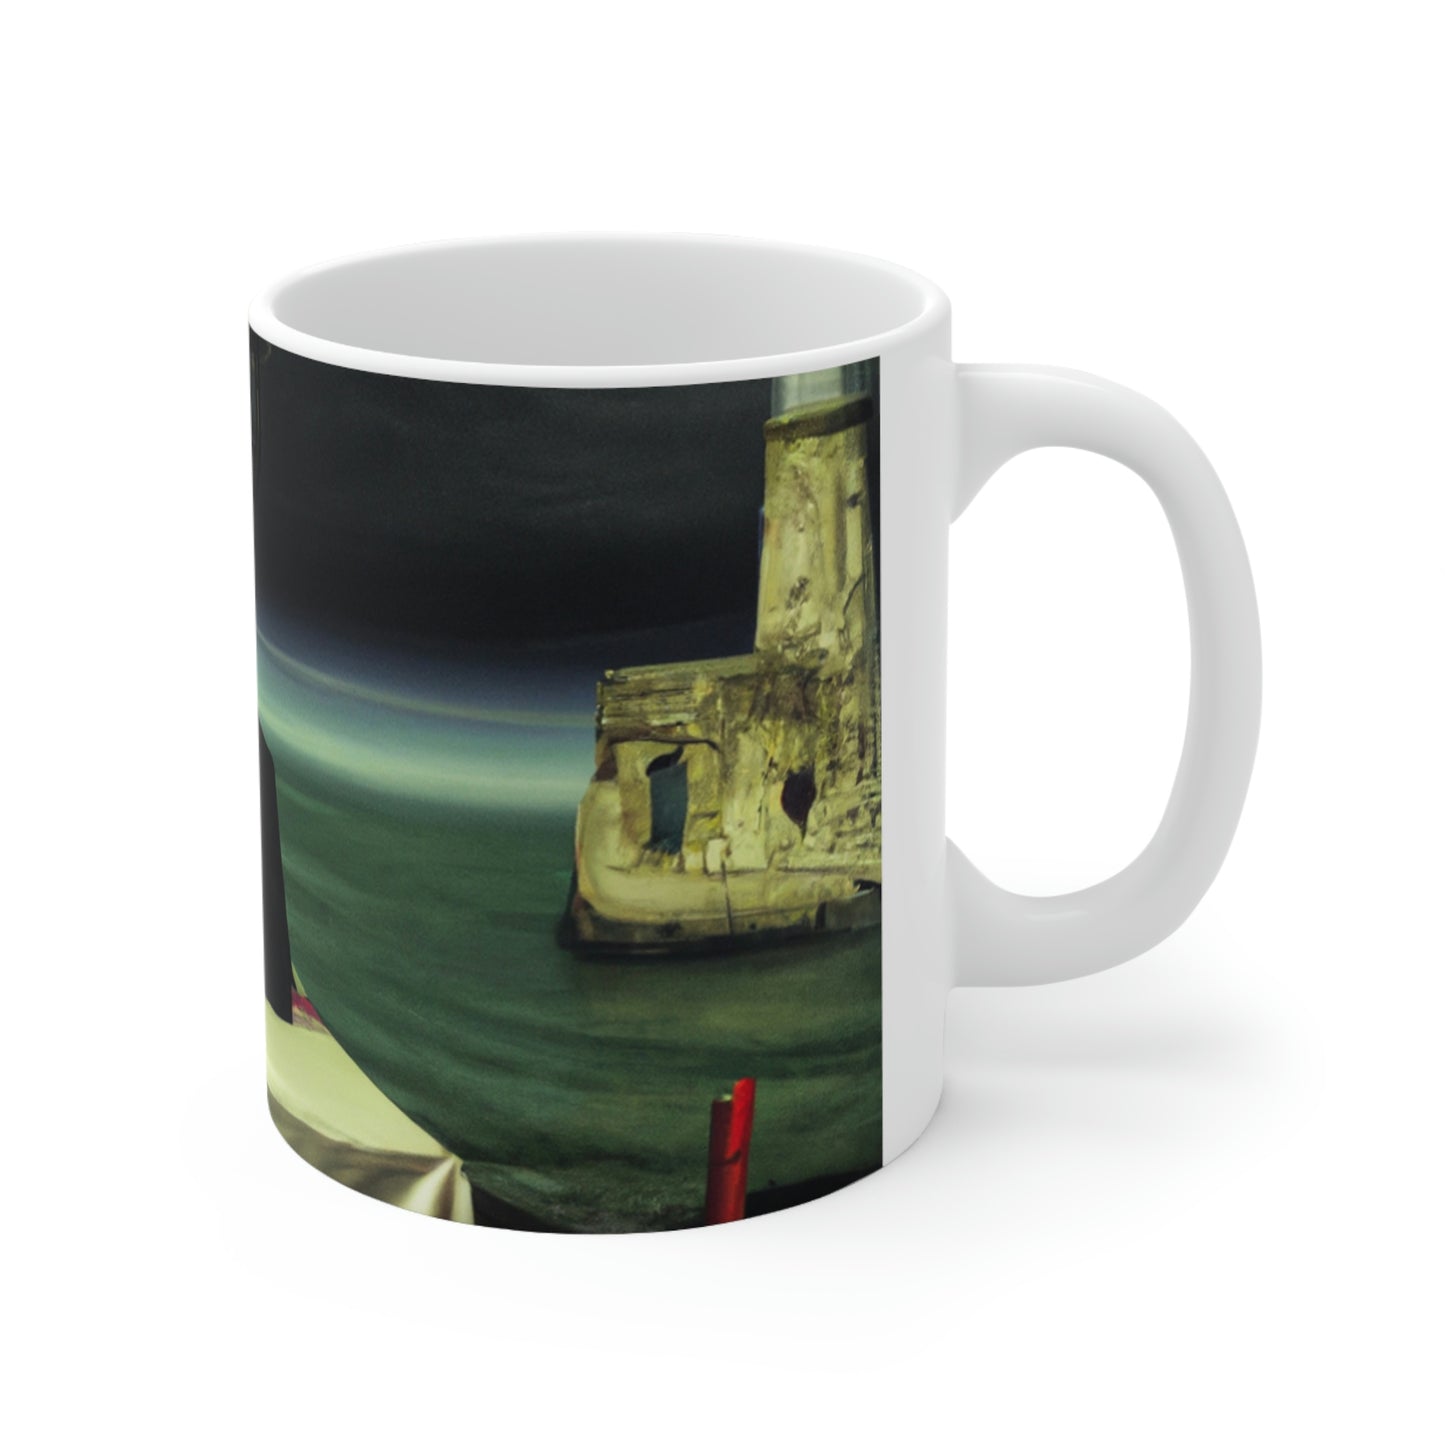 "A Beacon of Romance: An Intimate Candlelit Dinner in a Forgotten Lighthouse" - The Alien Ceramic Mug 11 oz